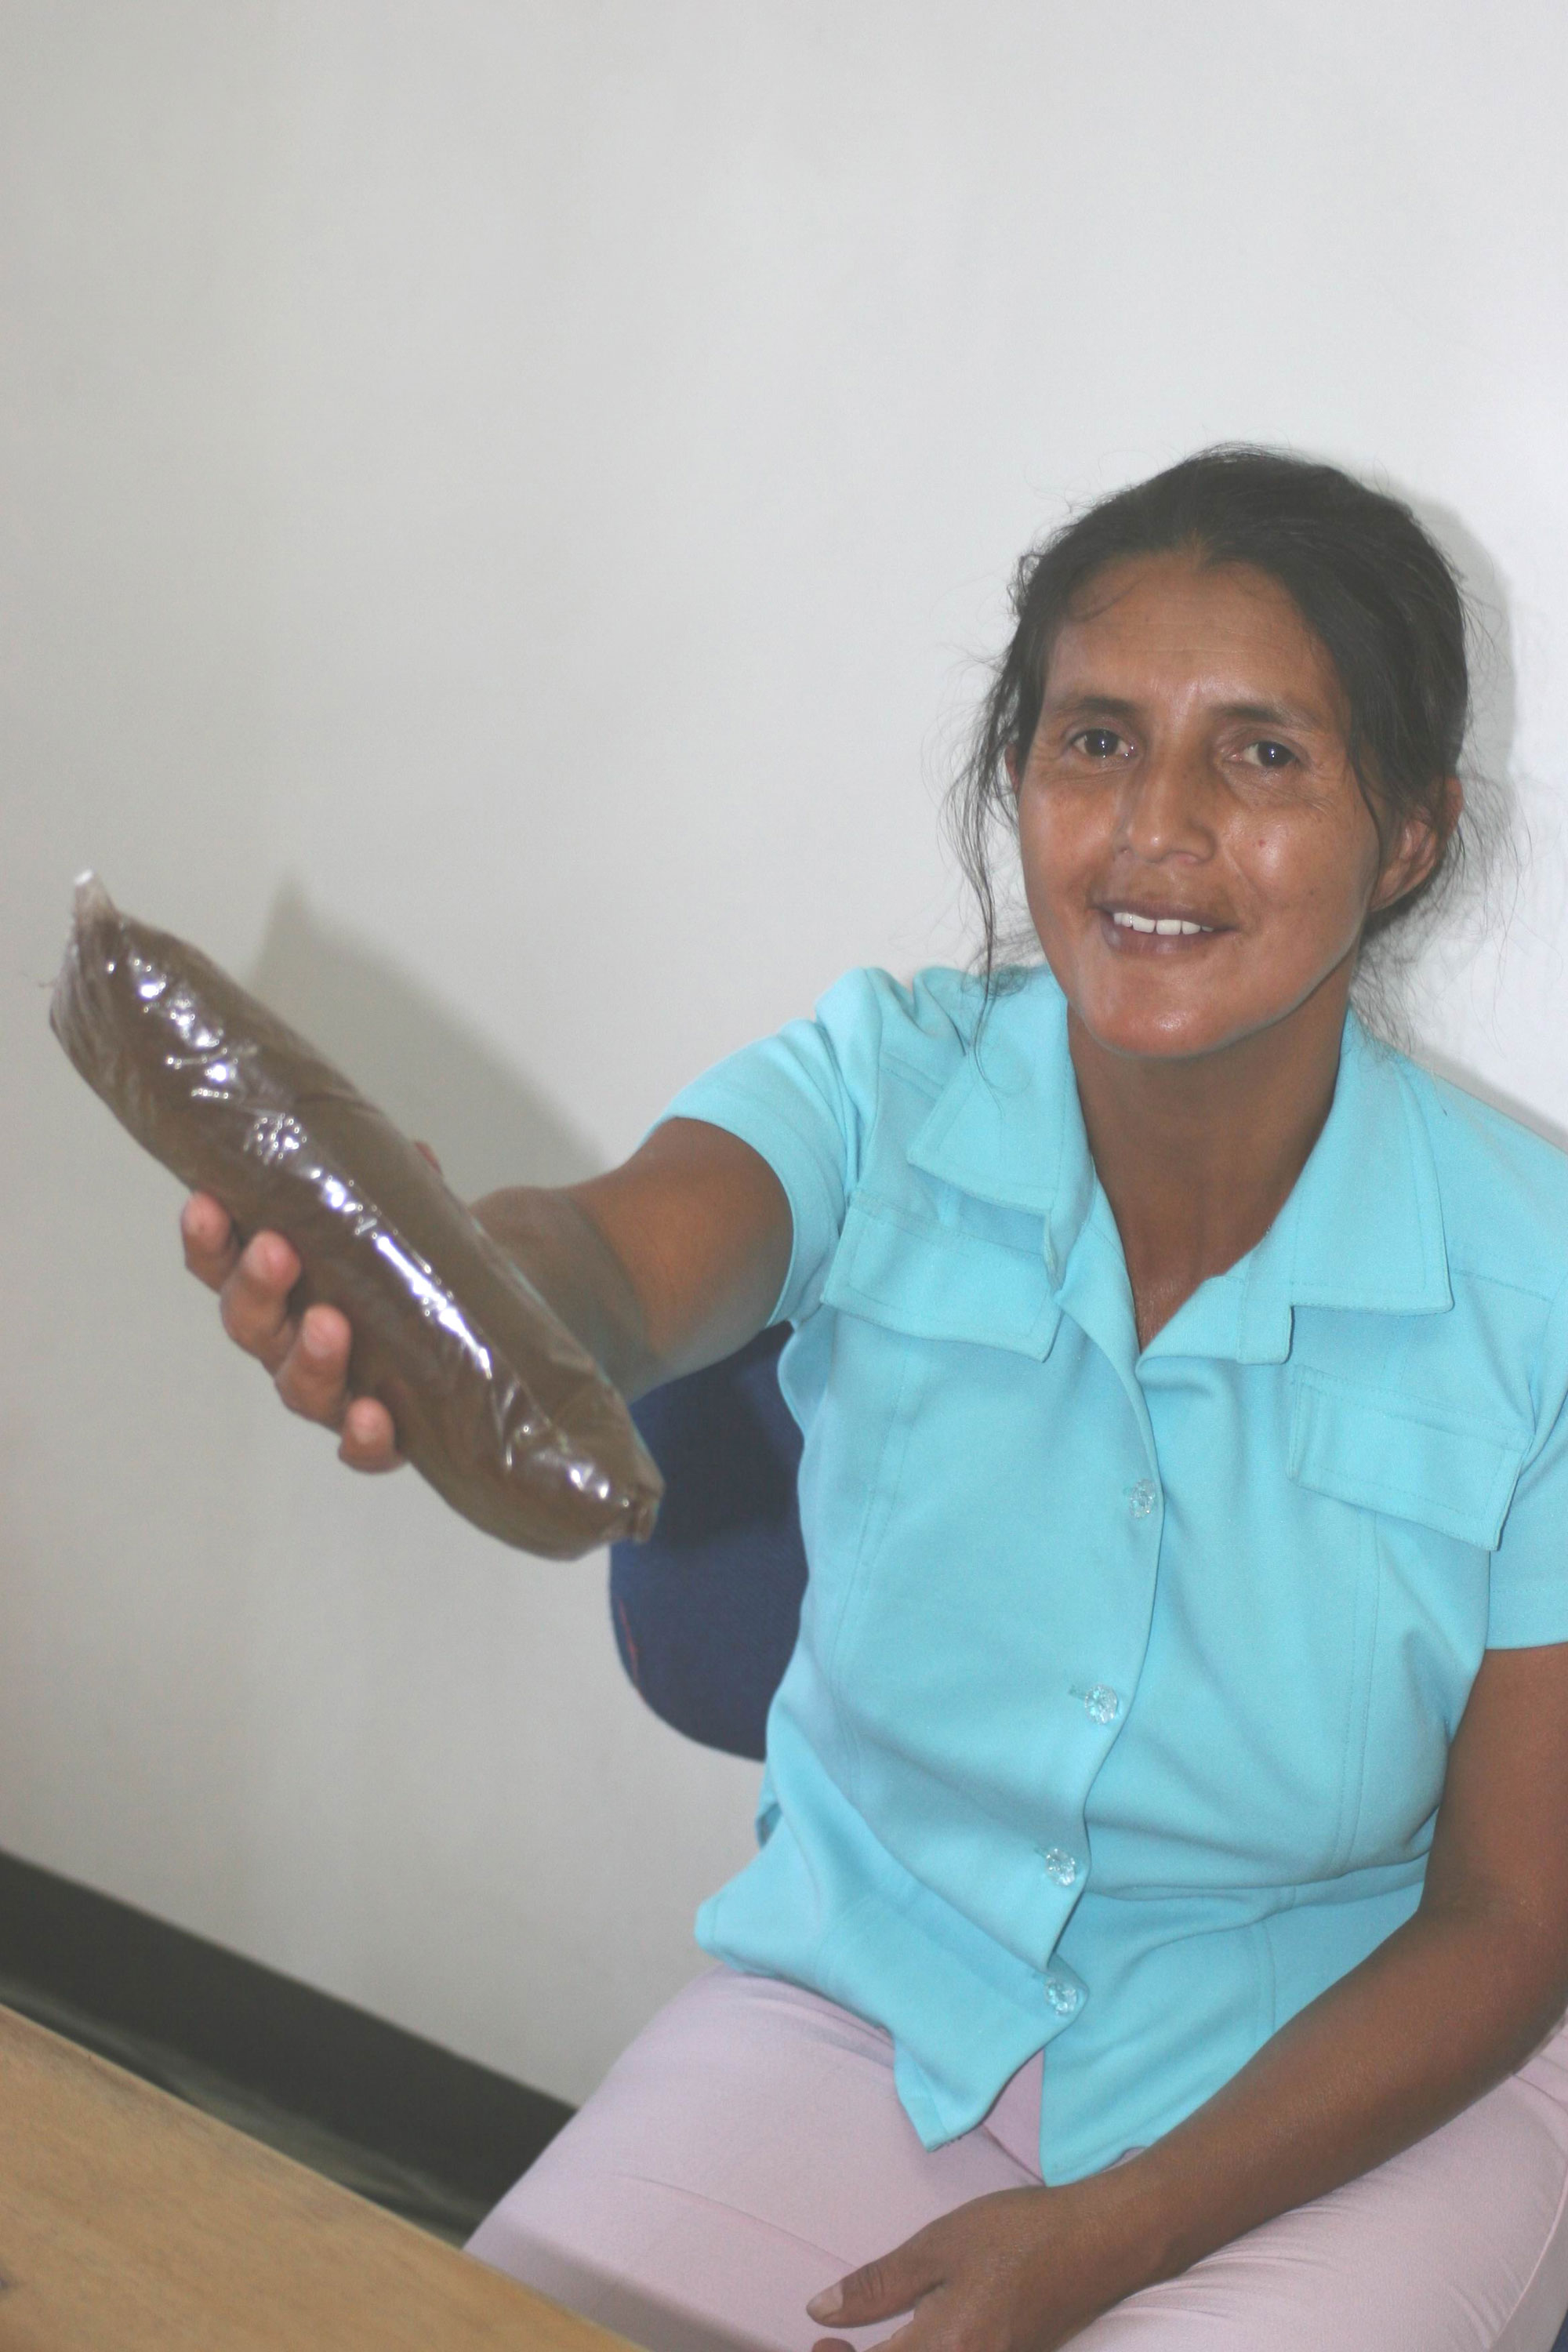 Norys Pechinché displays panela sugar produced in her village.